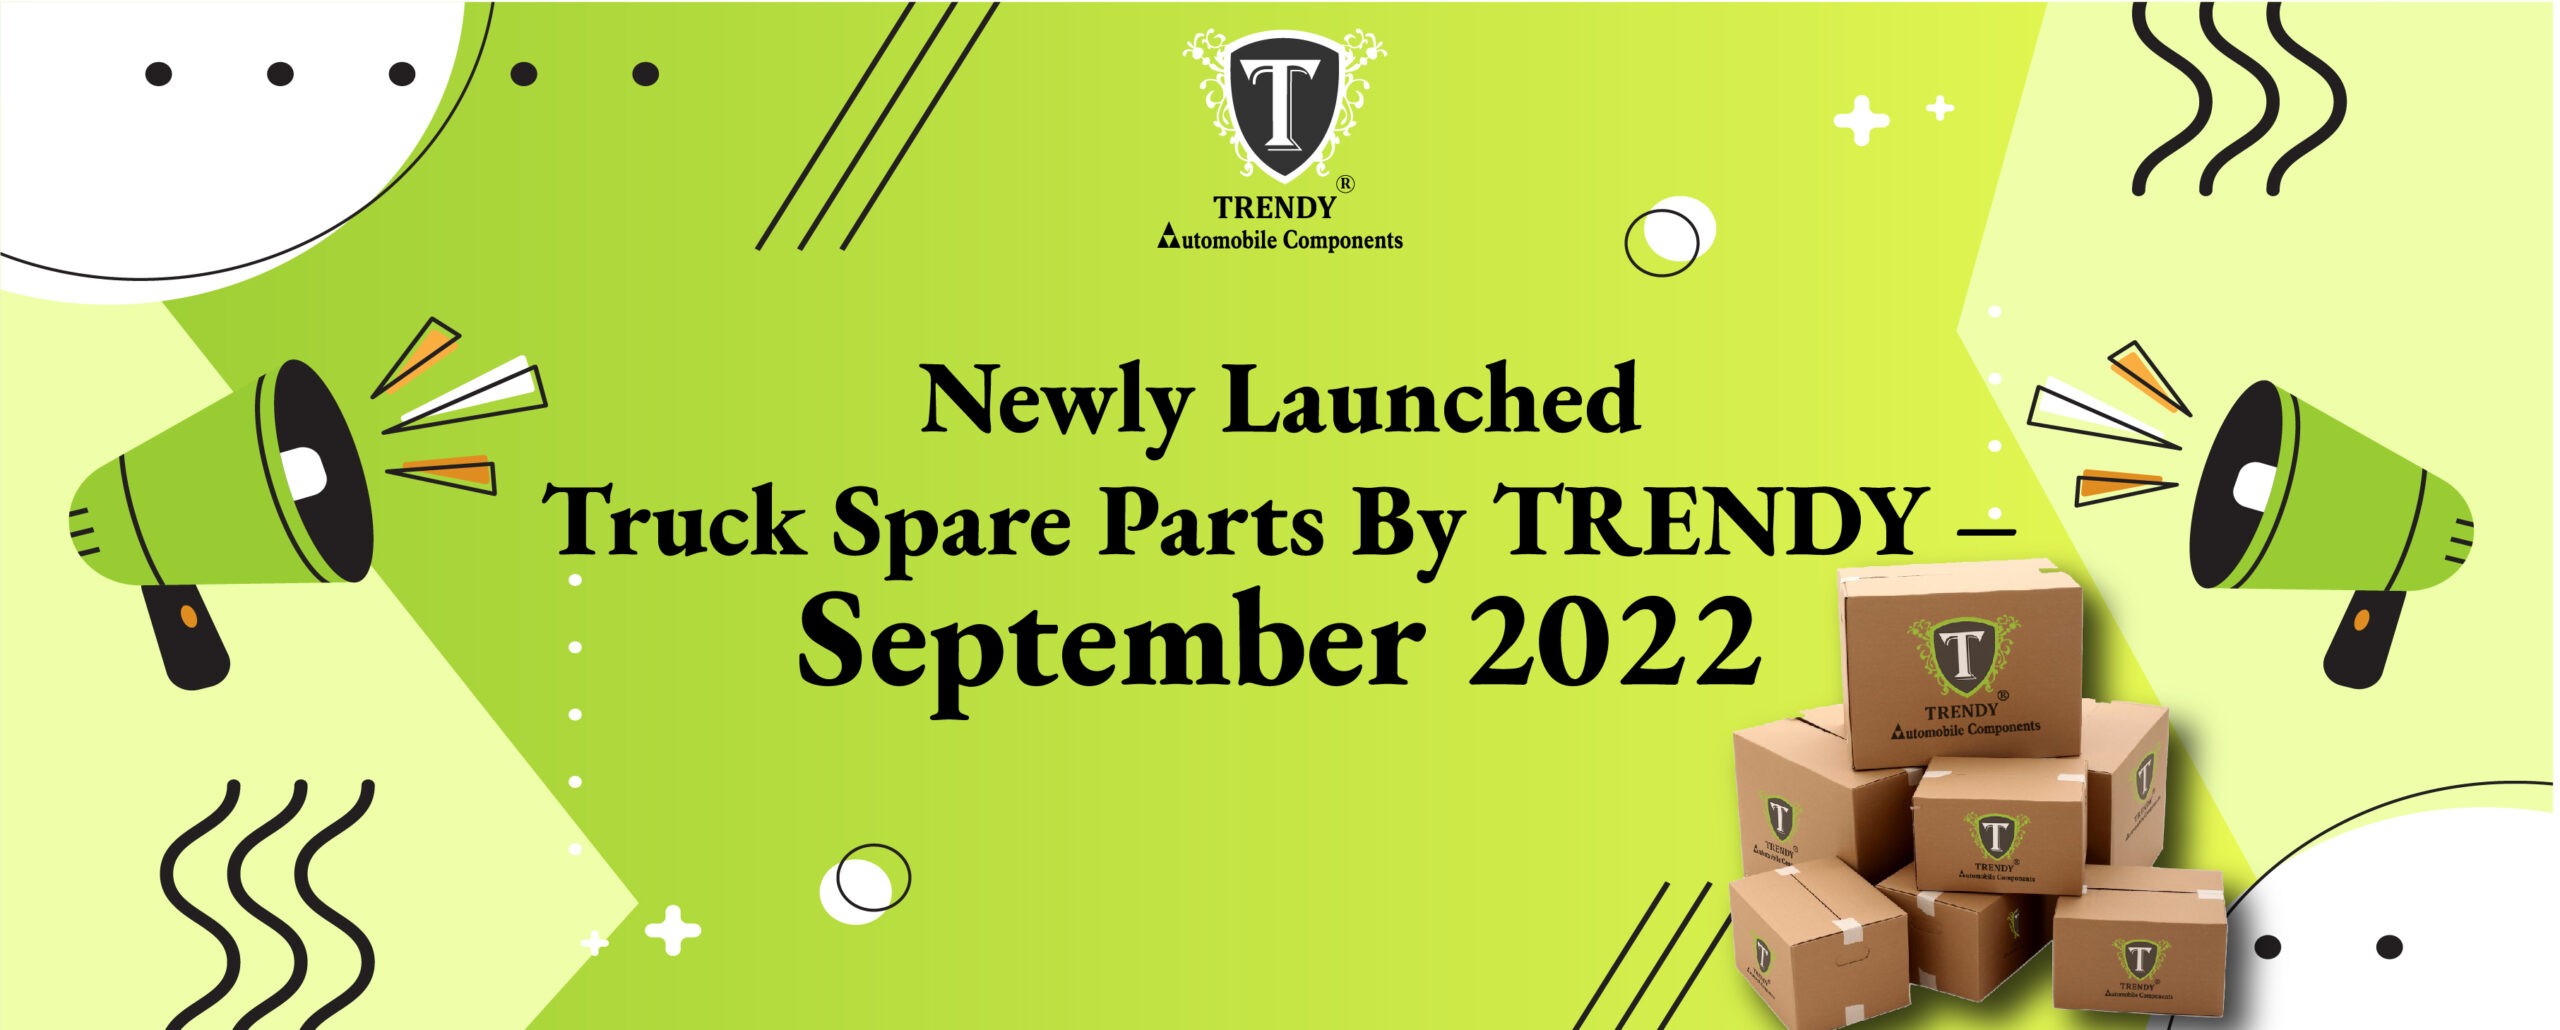 Newly-Launched-Truck-Spare-Parts-by-TRENDY-September